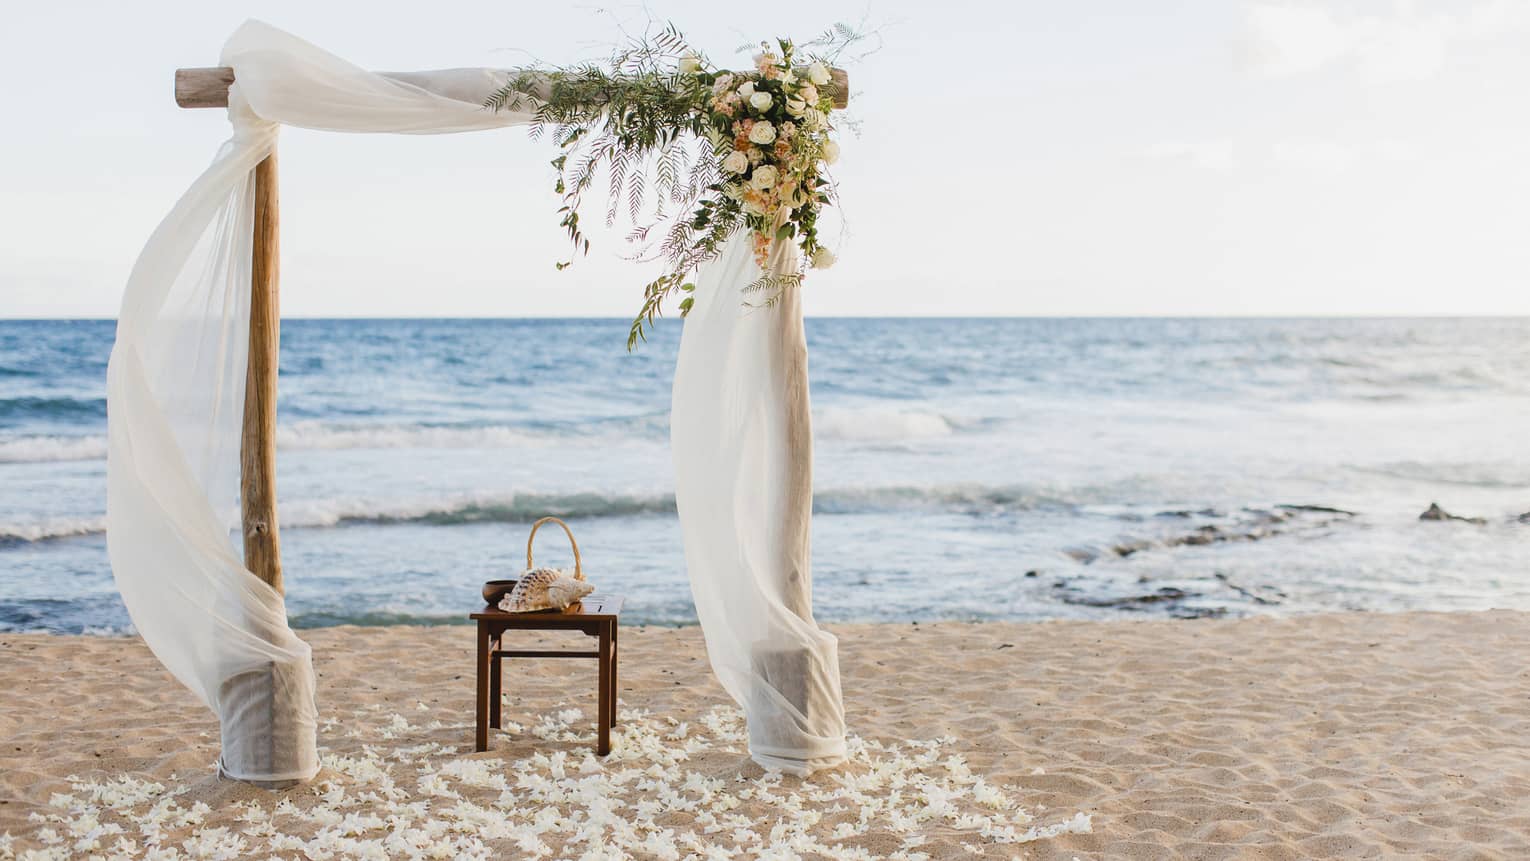 Sand beach wedding altar with flowers, white linens flowing in breeze